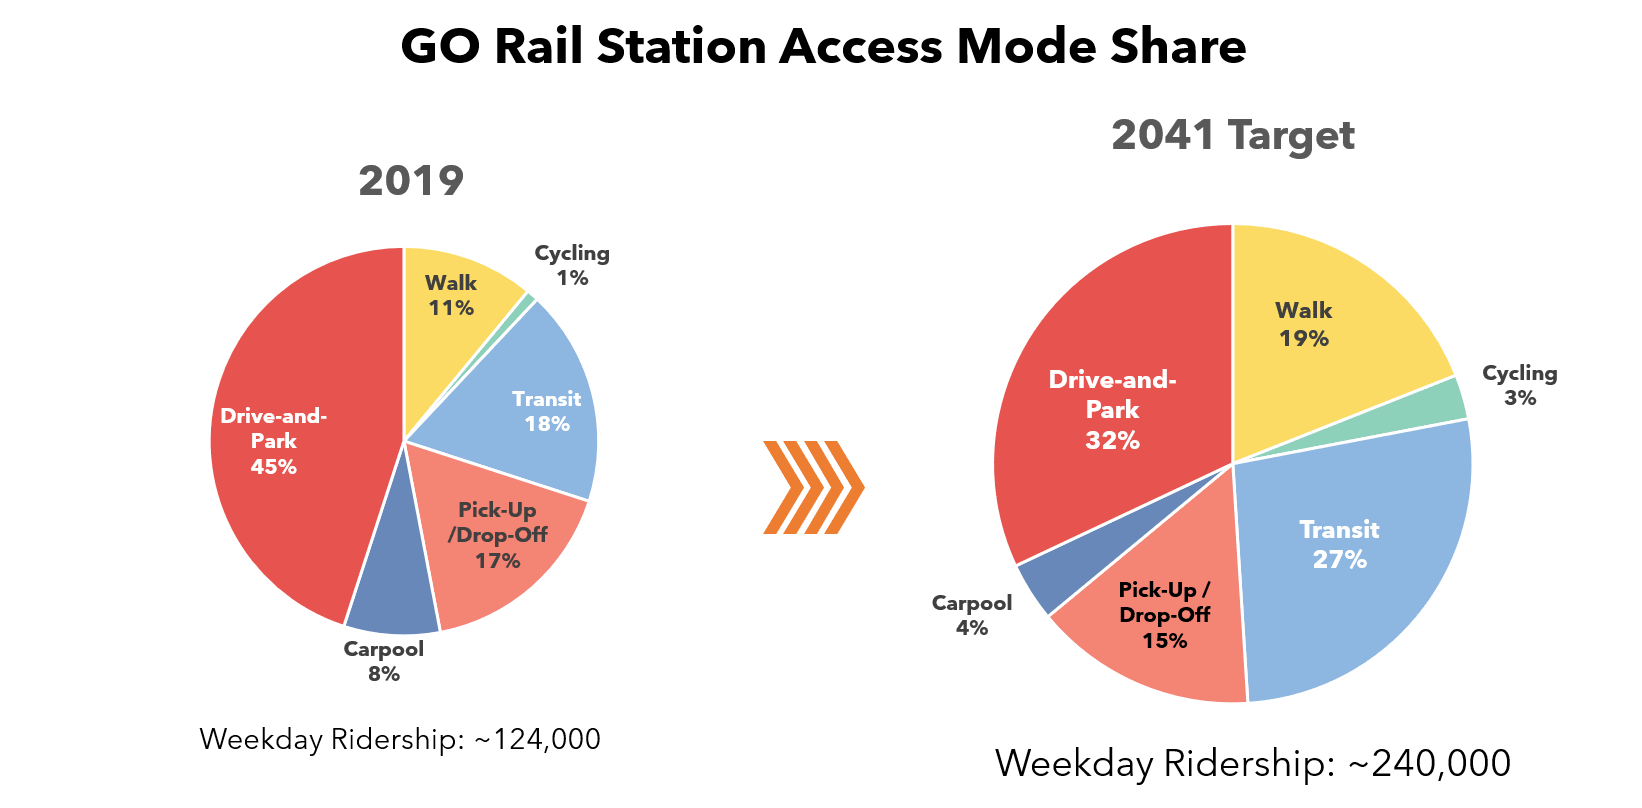 Station Access Mode Share